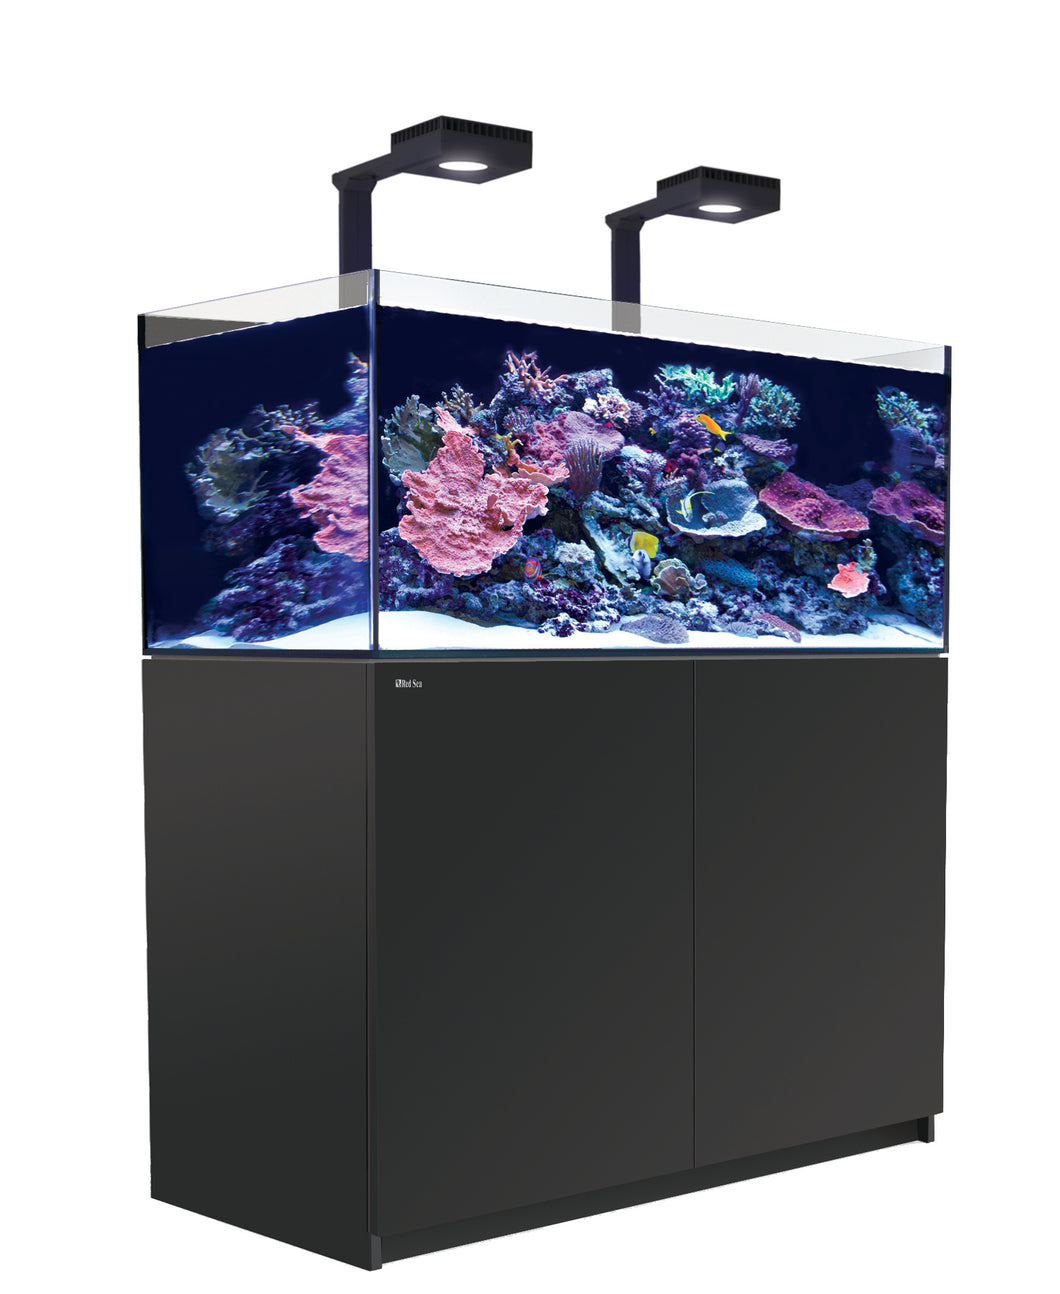 Red Sea REEFER-425 G2 Deluxe Premium Reef Aquarium 115 Gallons Reef-Ready LED Systems